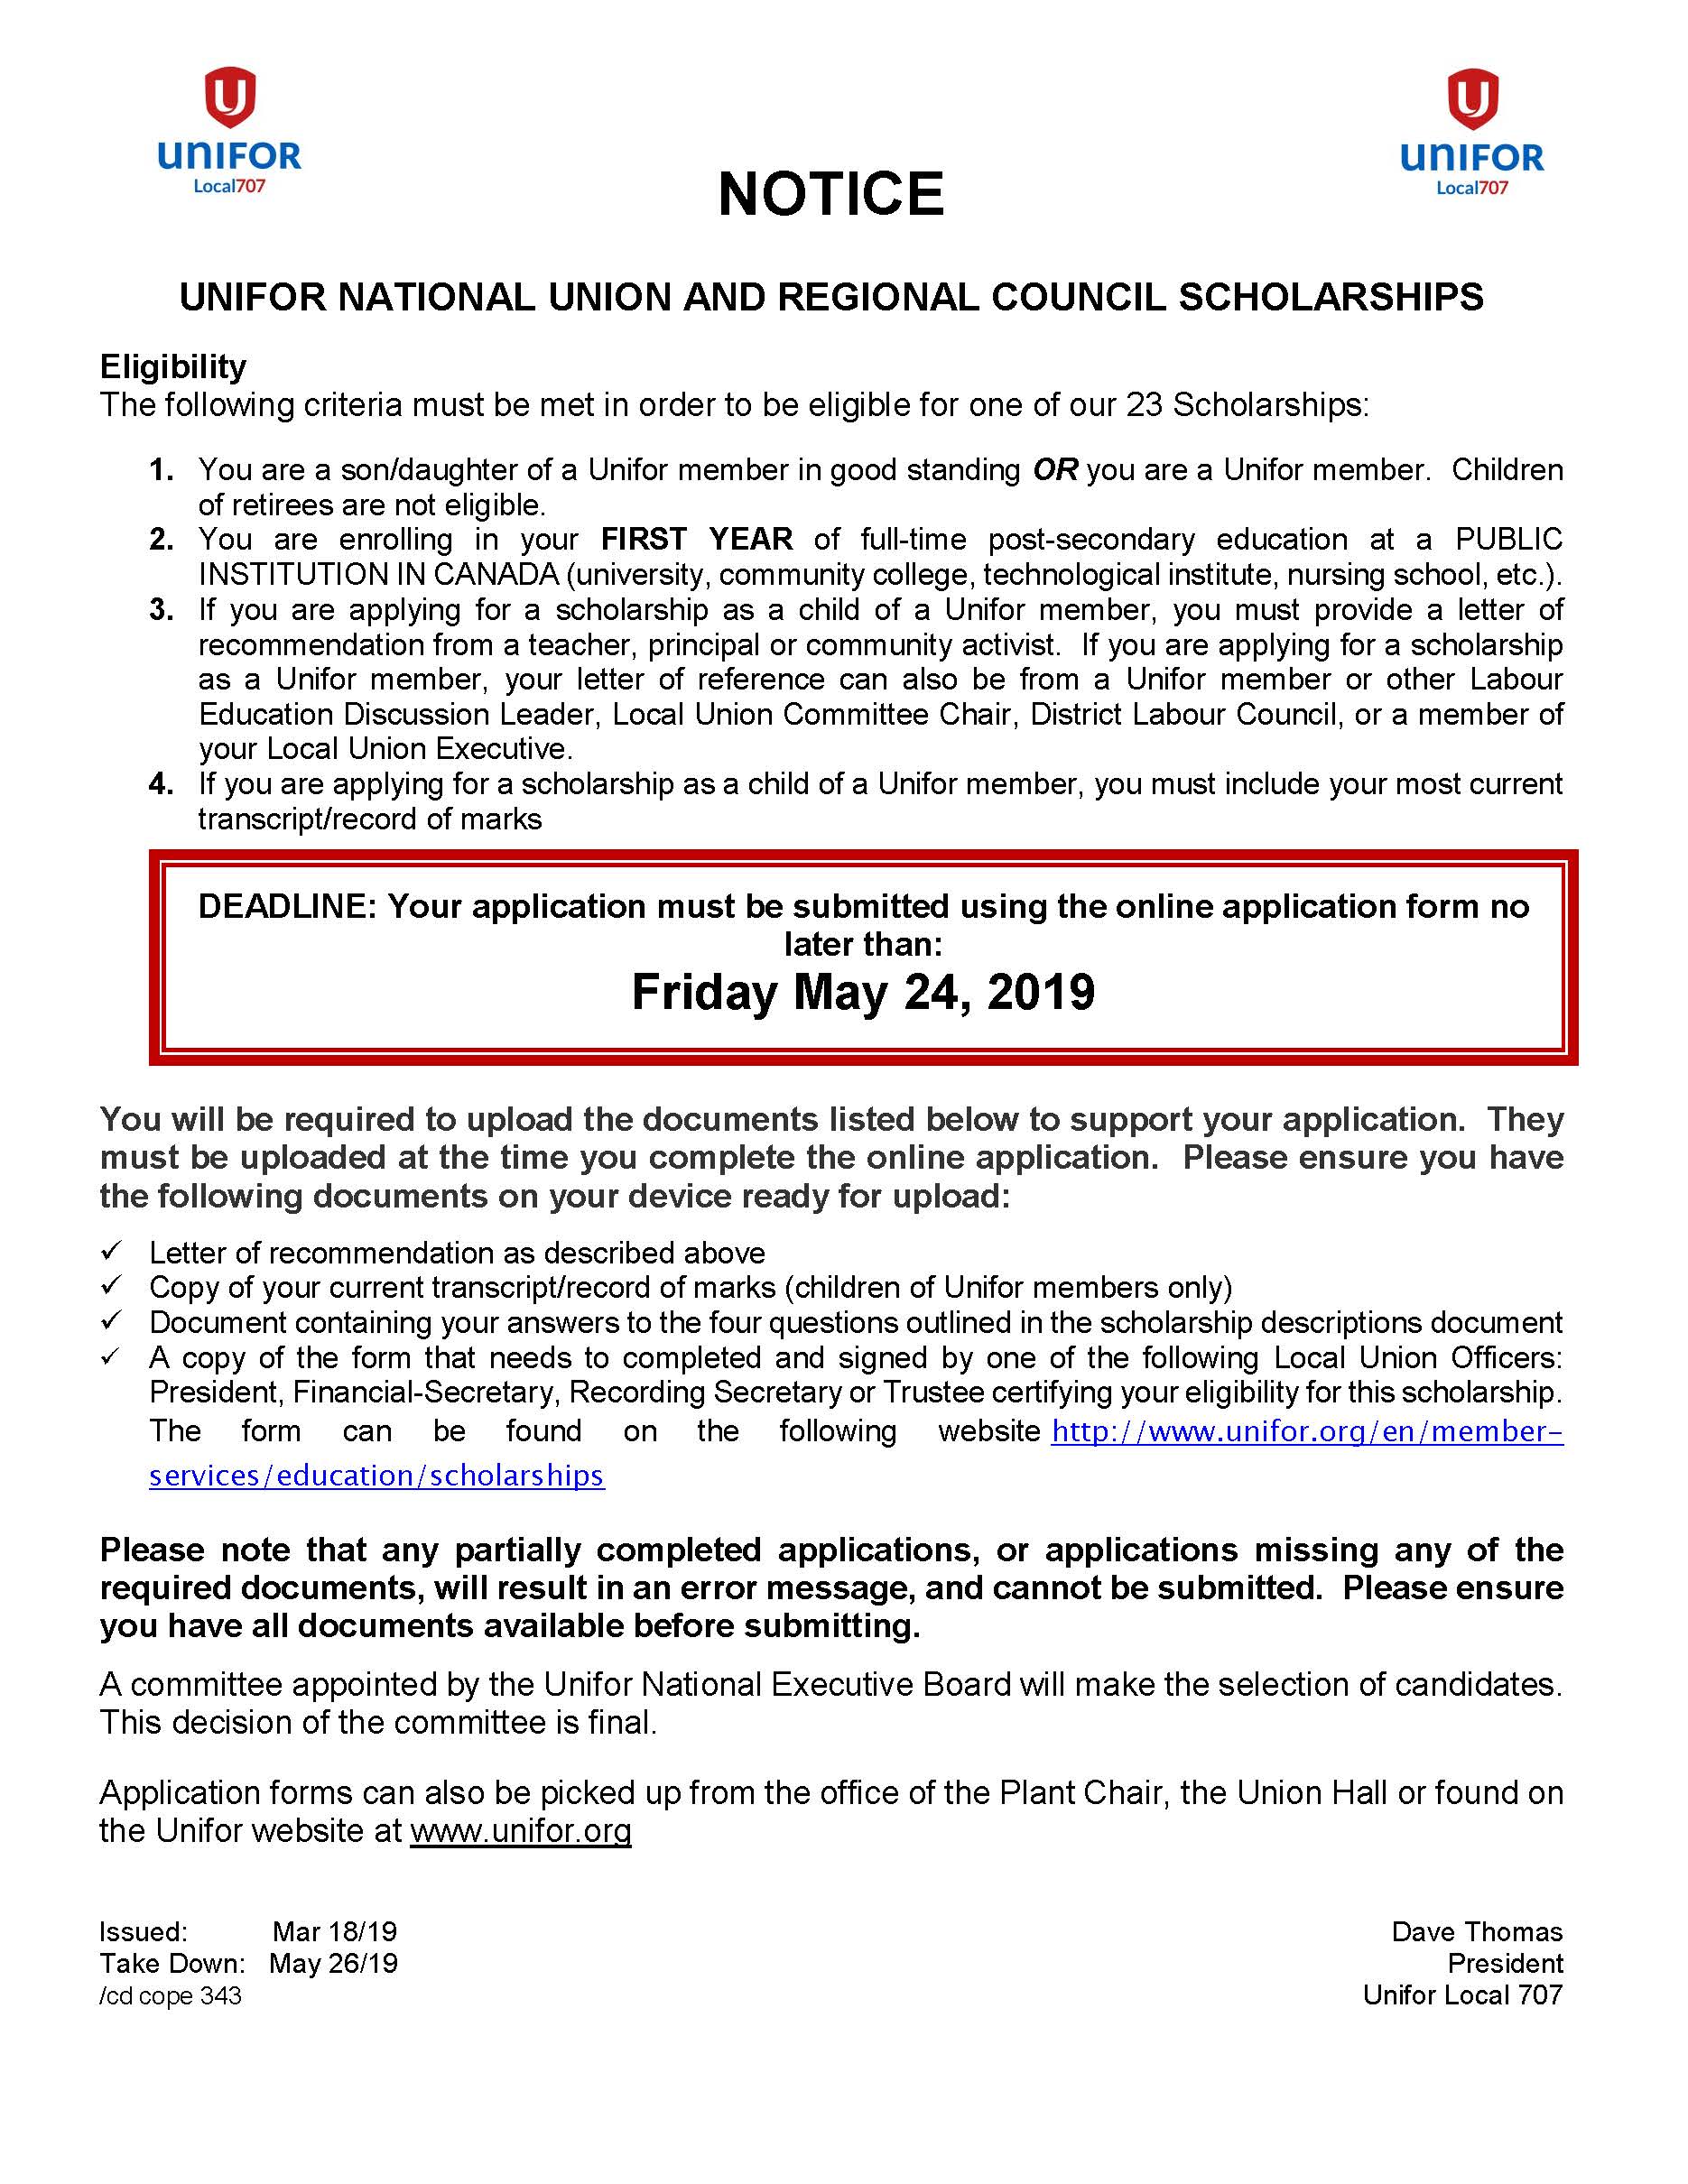 Unifor National Union and Regional Council Scholarships due Friday May 24 2019